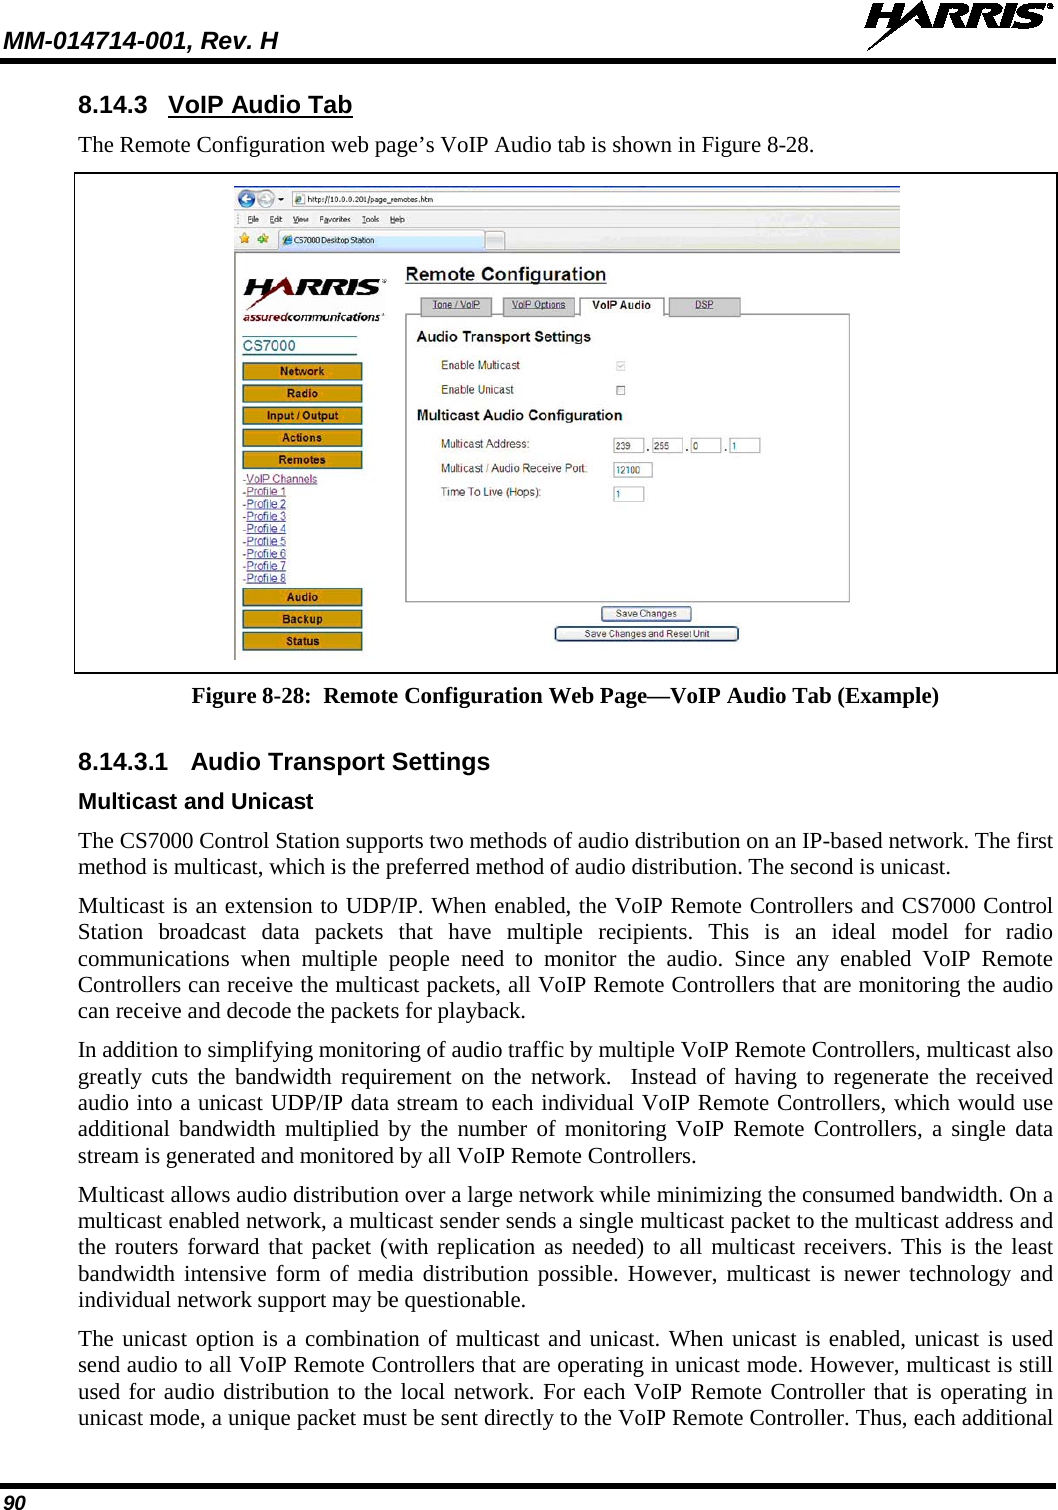 MM-014714-001, Rev. H   90 8.14.3 VoIP Audio Tab The Remote Configuration web page’s VoIP Audio tab is shown in Figure 8-28.   Figure 8-28:  Remote Configuration Web Page—VoIP Audio Tab (Example)  8.14.3.1 Audio Transport Settings Multicast and Unicast The CS7000 Control Station supports two methods of audio distribution on an IP-based network. The first method is multicast, which is the preferred method of audio distribution. The second is unicast. Multicast is an extension to UDP/IP. When enabled, the VoIP Remote Controllers and CS7000 Control Station broadcast data packets that have multiple recipients. This is an ideal model for radio communications when multiple people need to monitor the audio. Since any enabled VoIP Remote Controllers can receive the multicast packets, all VoIP Remote Controllers that are monitoring the audio can receive and decode the packets for playback. In addition to simplifying monitoring of audio traffic by multiple VoIP Remote Controllers, multicast also greatly cuts the bandwidth requirement on the network.  Instead of having to regenerate the received audio into a unicast UDP/IP data stream to each individual VoIP Remote Controllers, which would use additional bandwidth multiplied by the number of monitoring VoIP Remote Controllers, a single data stream is generated and monitored by all VoIP Remote Controllers. Multicast allows audio distribution over a large network while minimizing the consumed bandwidth. On a multicast enabled network, a multicast sender sends a single multicast packet to the multicast address and the routers forward that packet (with replication as needed) to all multicast receivers. This is the least bandwidth intensive form of media distribution possible. However, multicast is newer technology and individual network support may be questionable. The unicast option is a combination of multicast and unicast. When unicast is enabled, unicast is used send audio to all VoIP Remote Controllers that are operating in unicast mode. However, multicast is still used for audio distribution to the local network. For each VoIP Remote Controller that is operating in unicast mode, a unique packet must be sent directly to the VoIP Remote Controller. Thus, each additional 